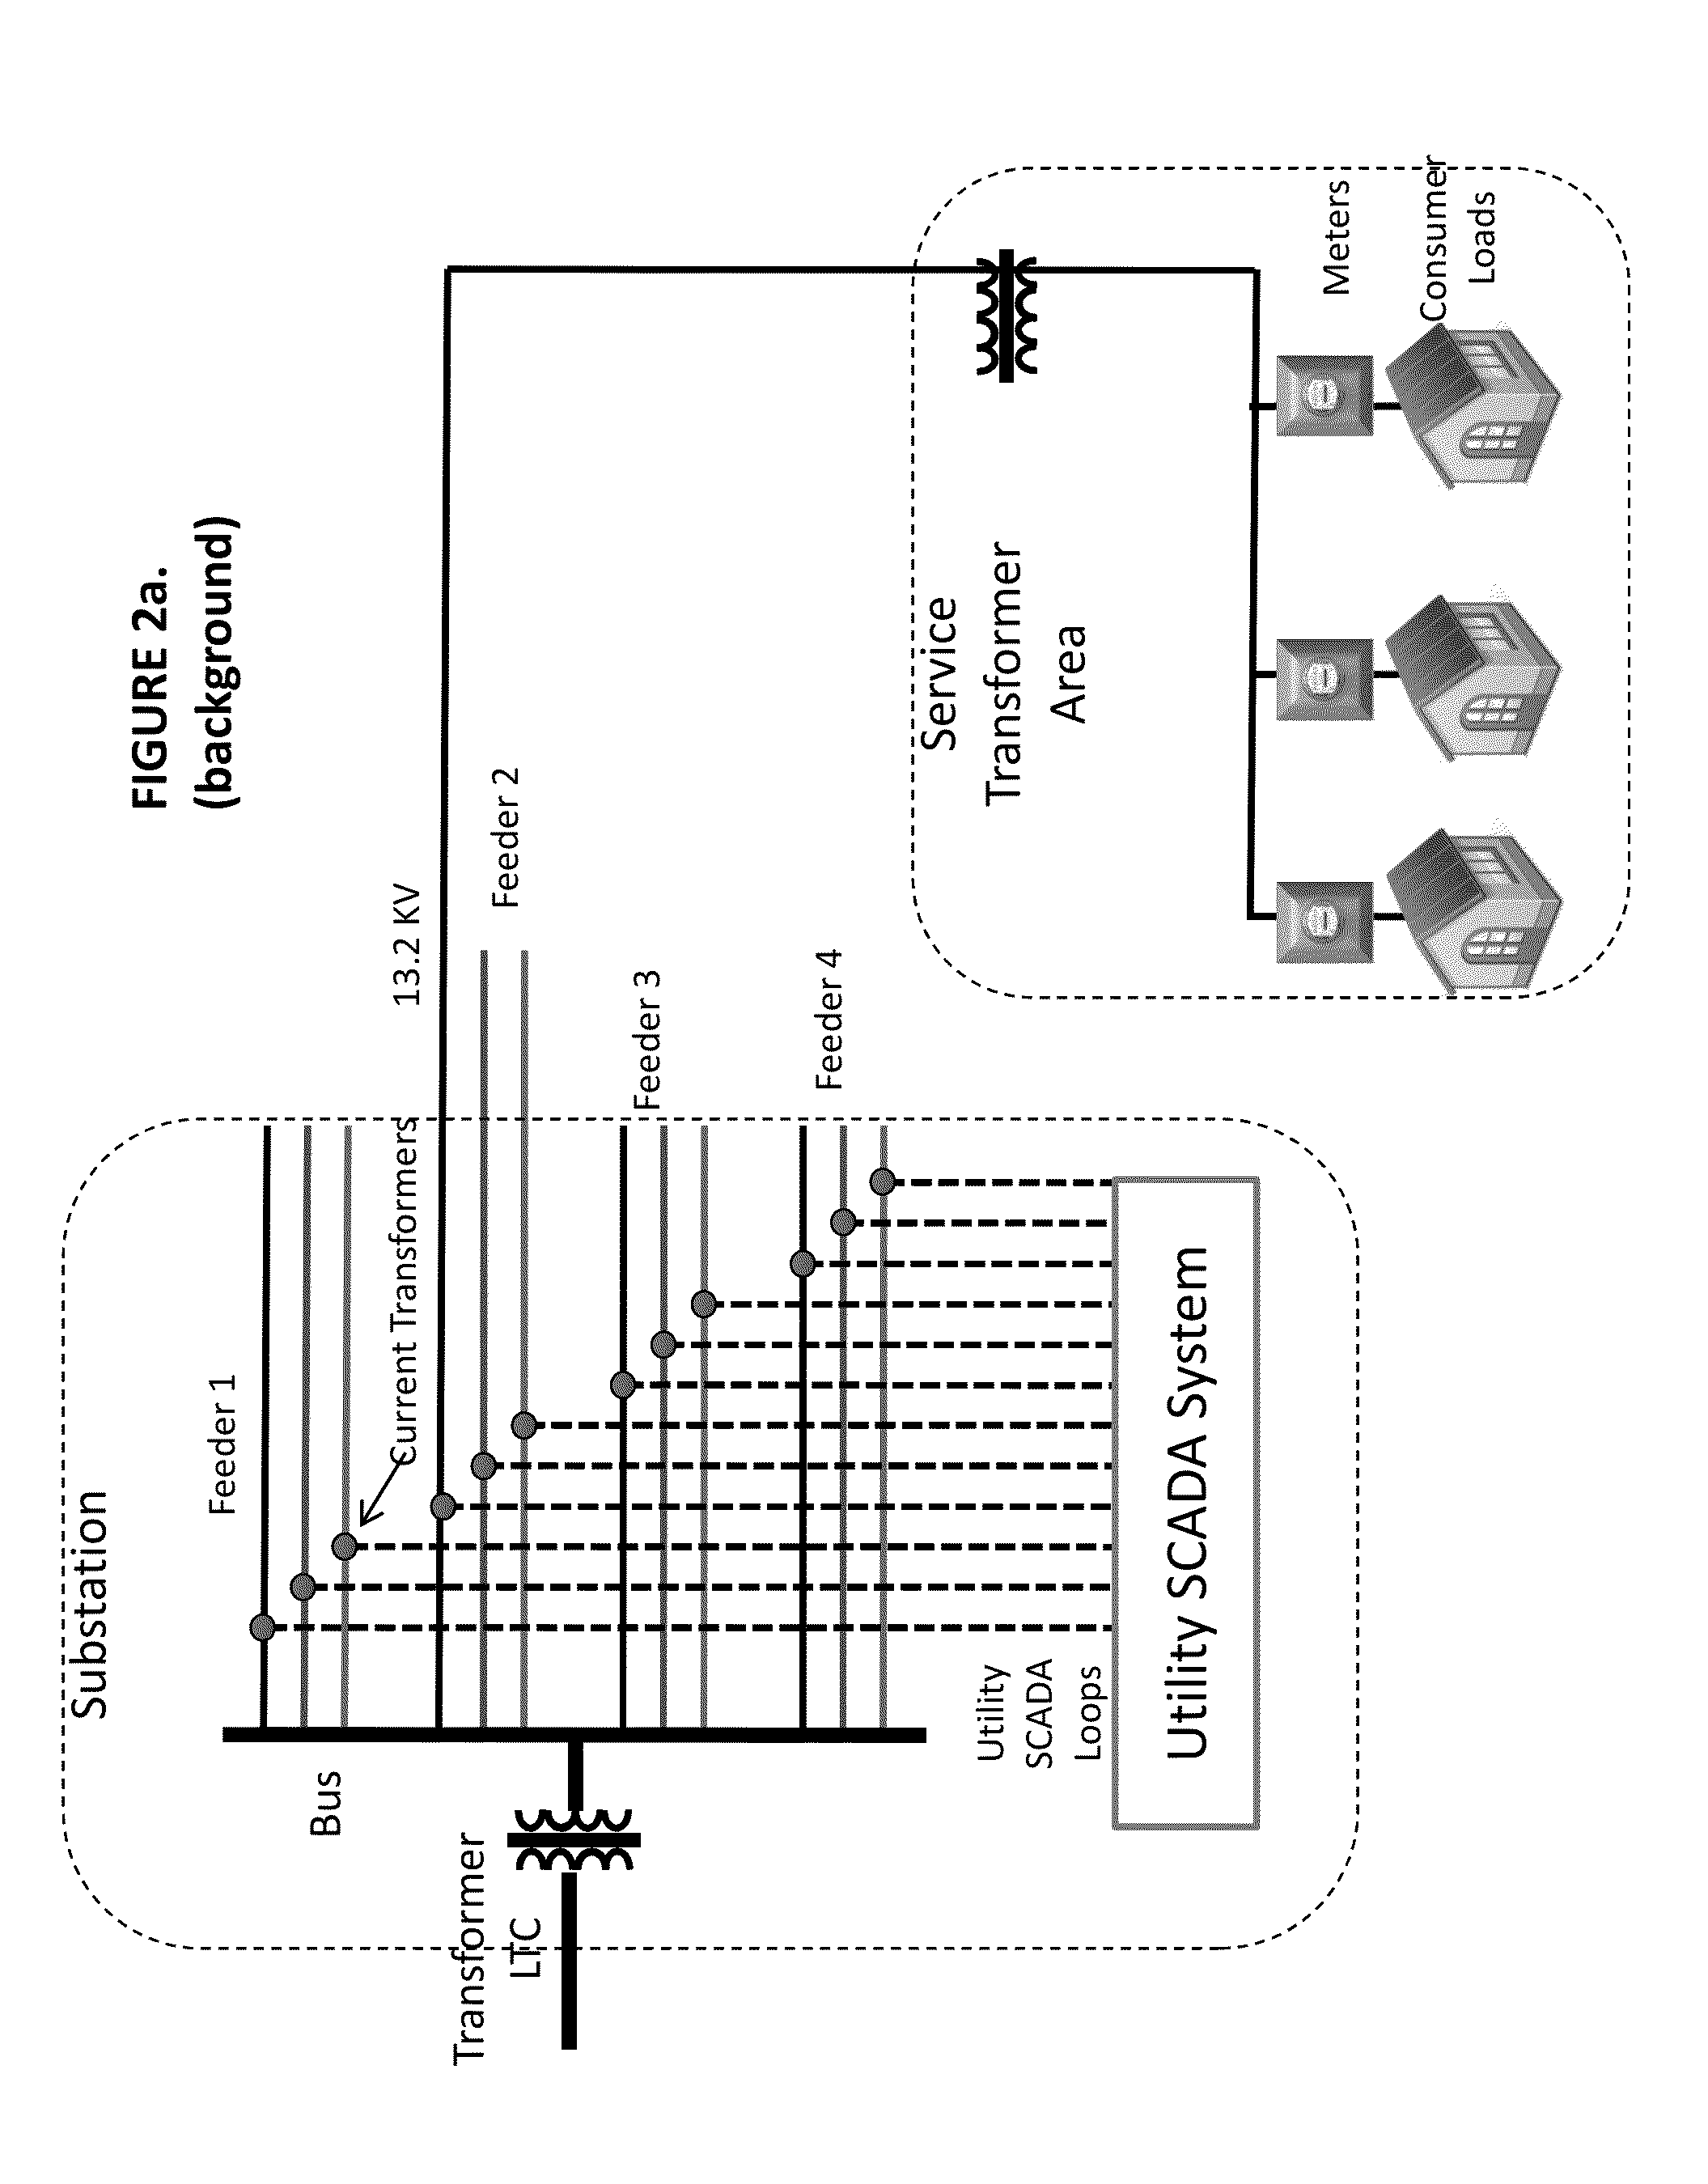 Methods for discovering, partitioning, organizing, and administering communication devices in a transformer area network